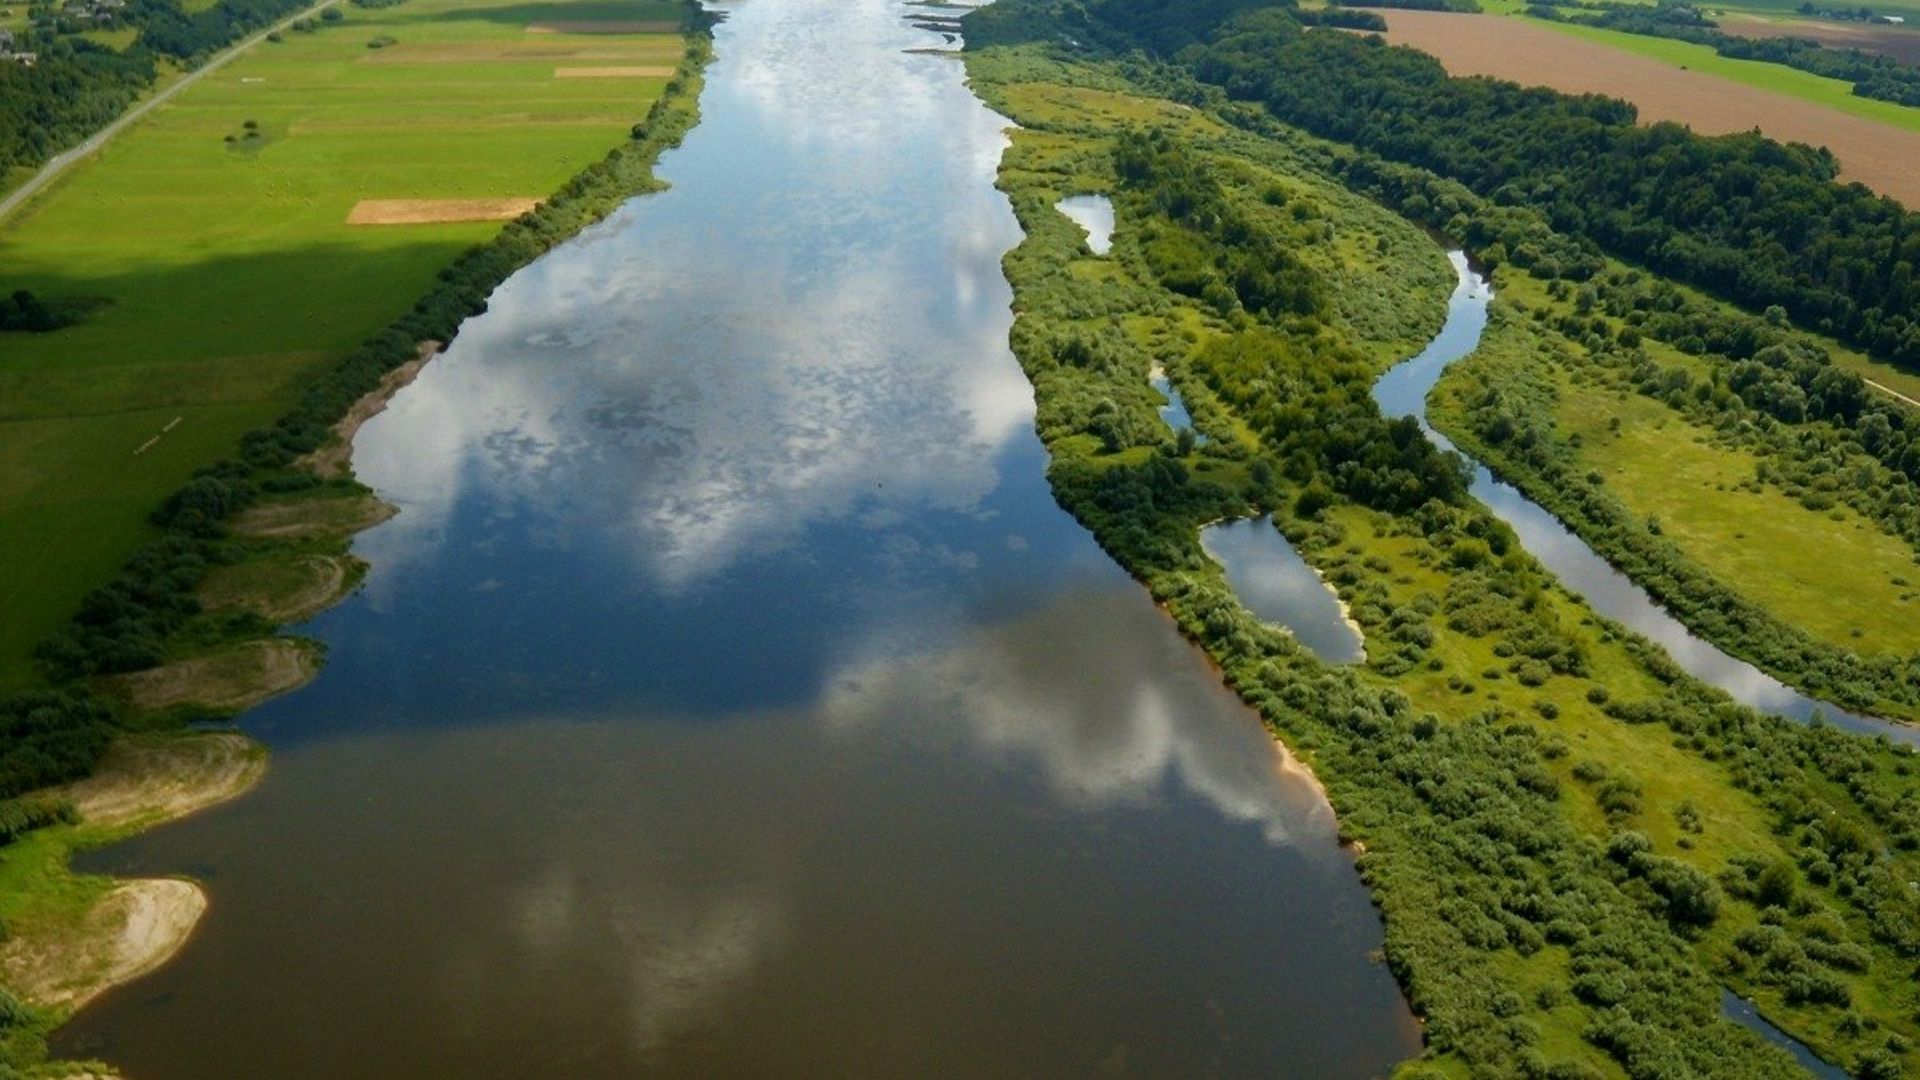 The densest river network is located in the northwest and northeast of the country, which belongs to the Neman basin